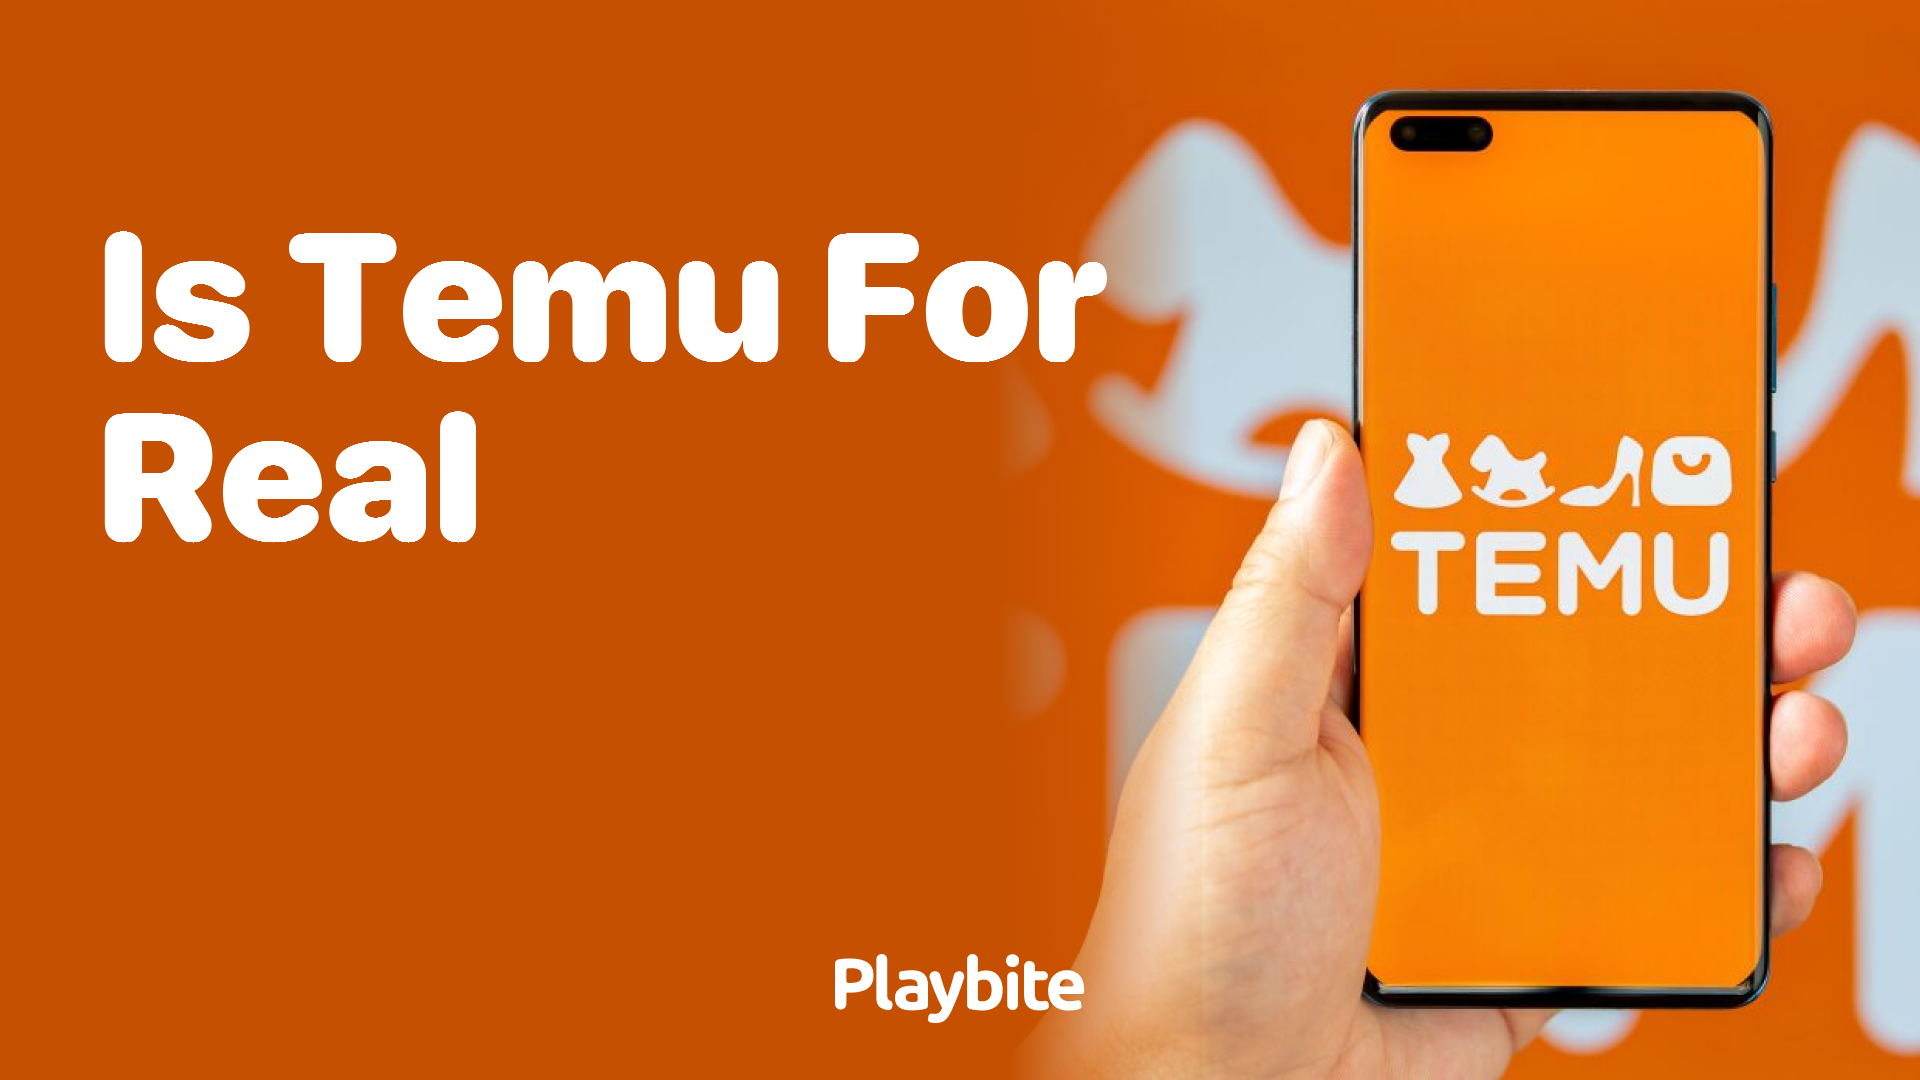 Is Temu for Real? Find Out If Temu Is a Legitimate Shopping Platform